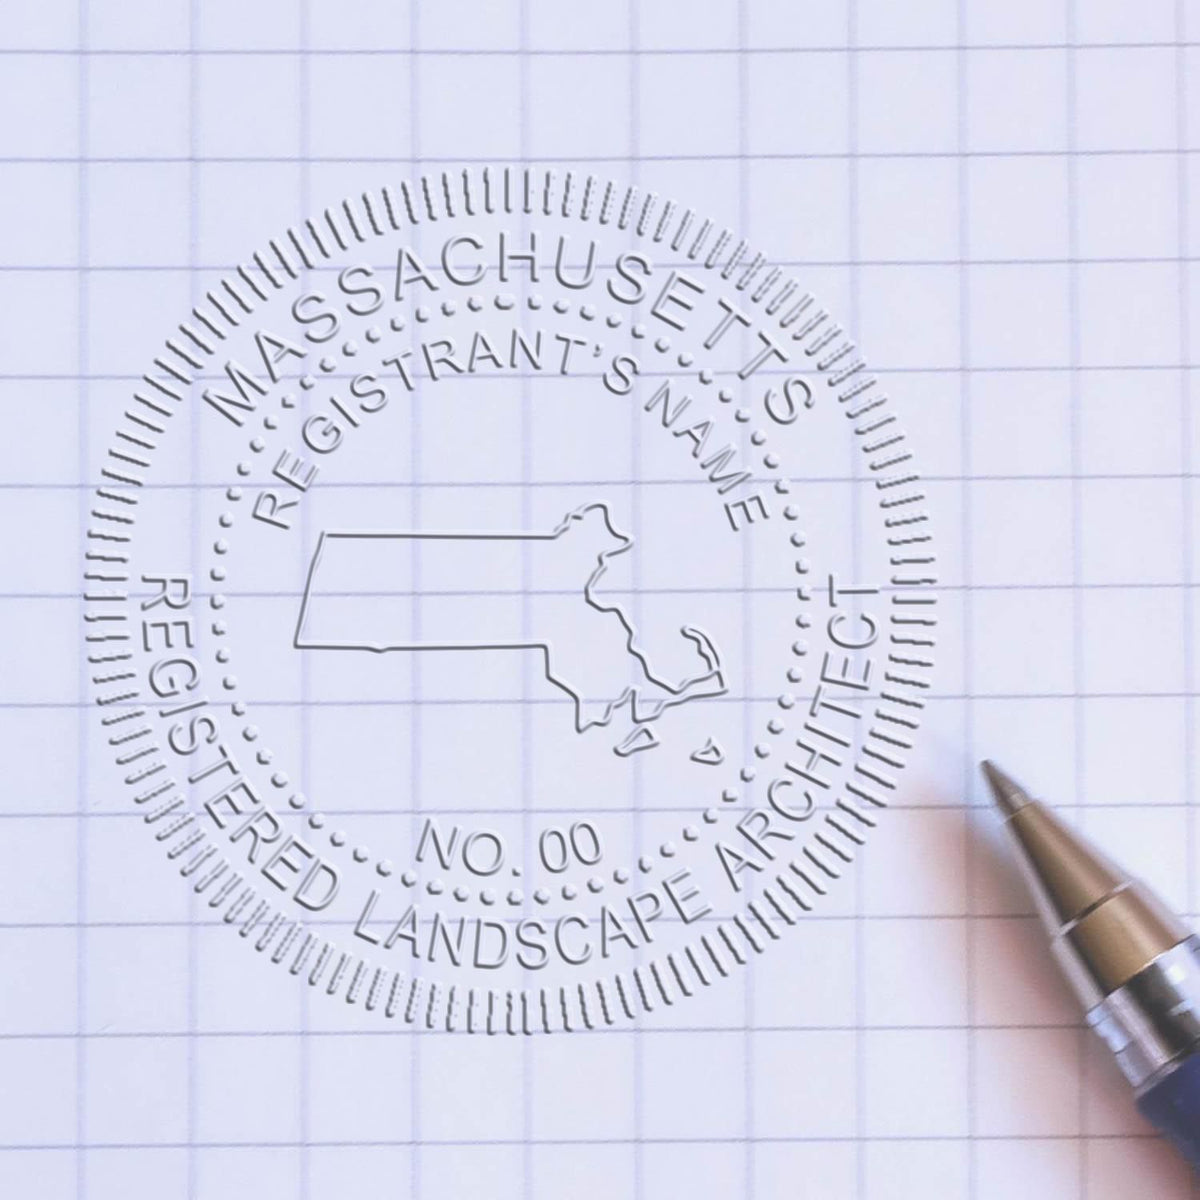 The Soft Pocket Massachusetts Landscape Architect Embosser stamp impression comes to life with a crisp, detailed photo on paper - showcasing true professional quality.